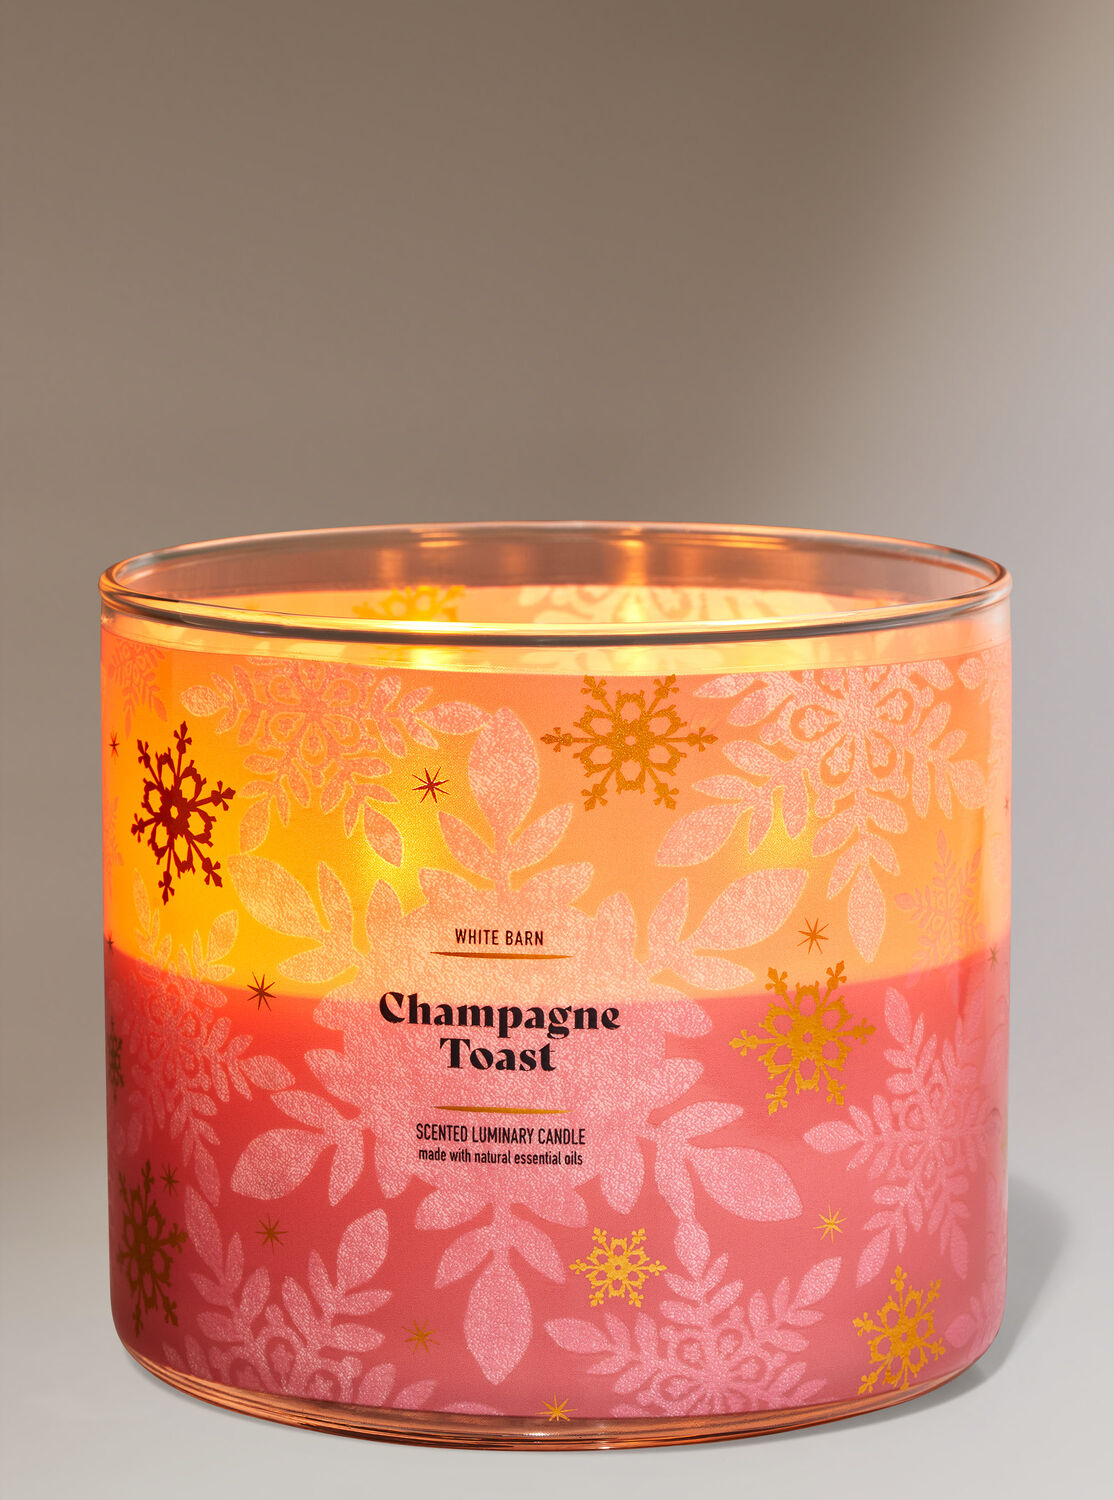 Bath and Bodyworks Scented Candle Review Champagne toast, Gallery posted  by Pongpang.Sr